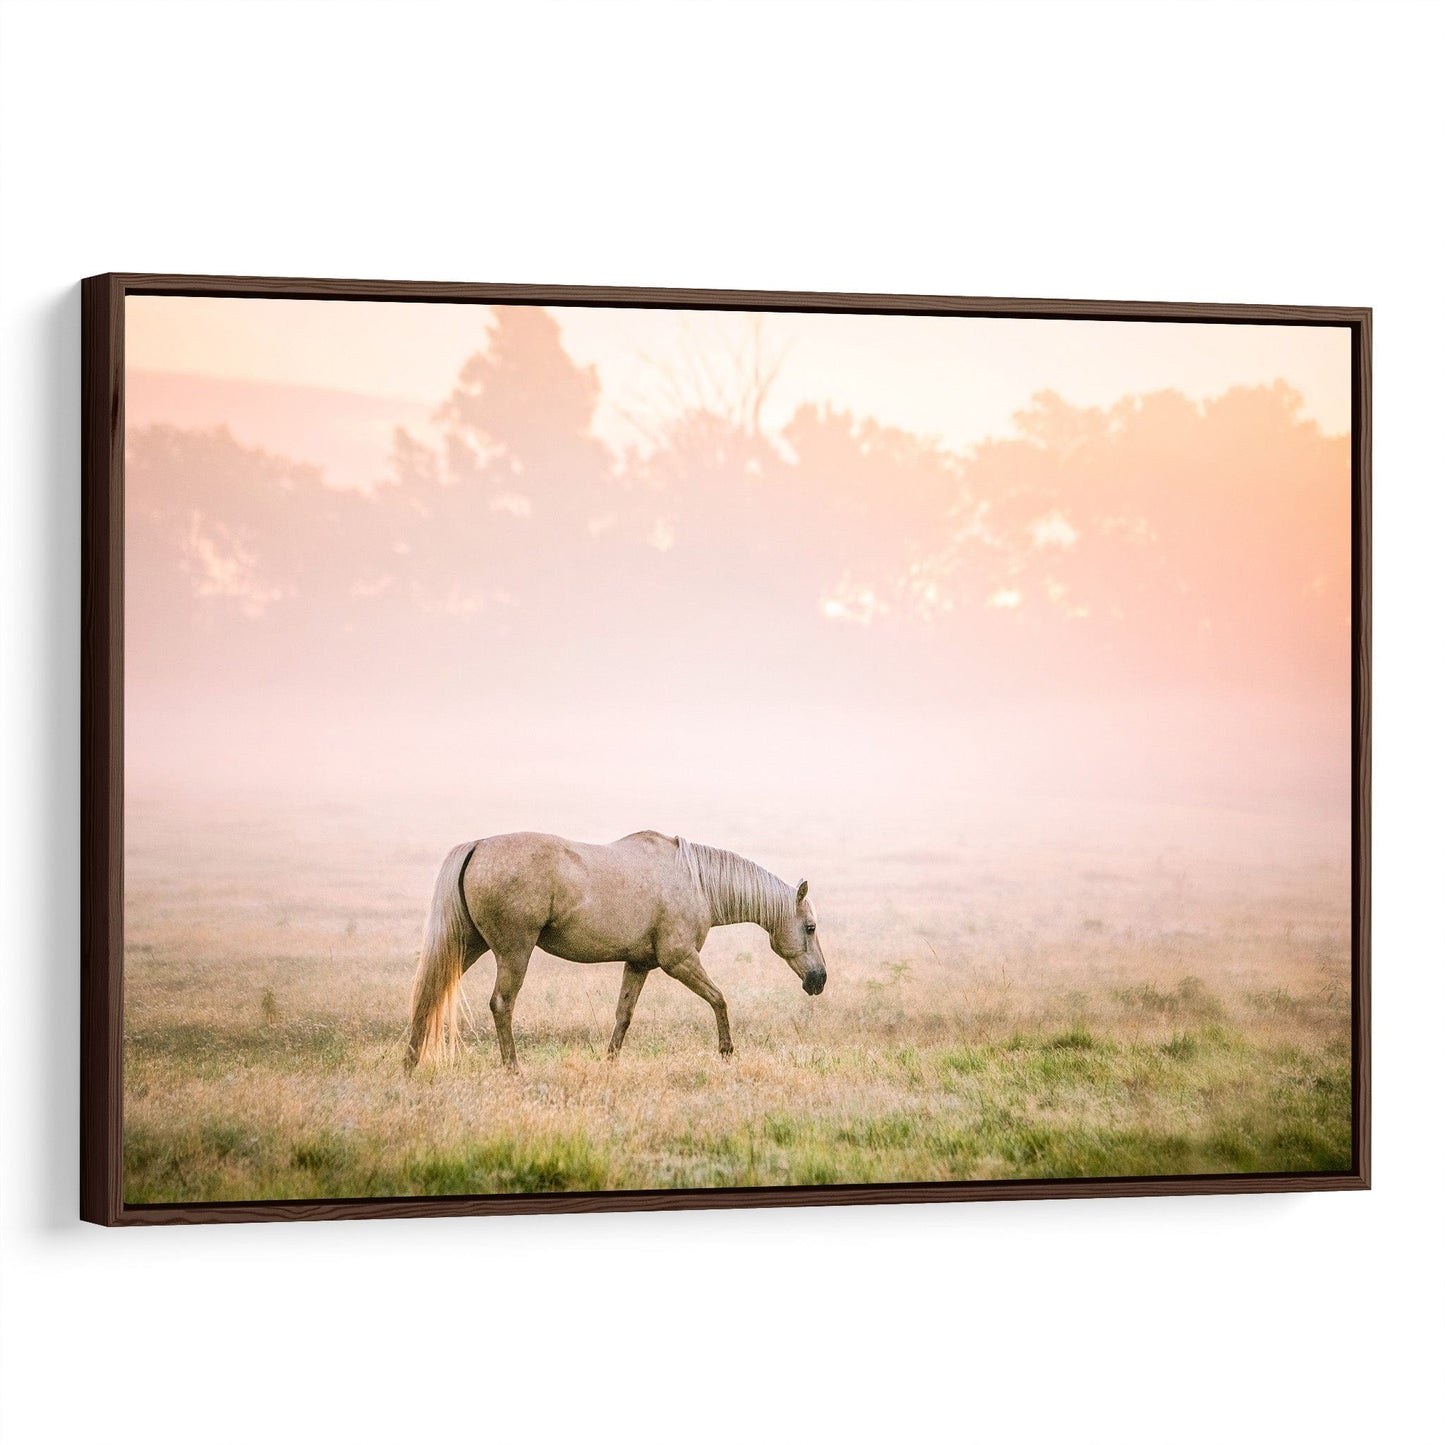 Palomino Horse Wall Art in Pastel Colors Canvas-Walnut Frame / 12 x 18 Inches Wall Art Teri James Photography